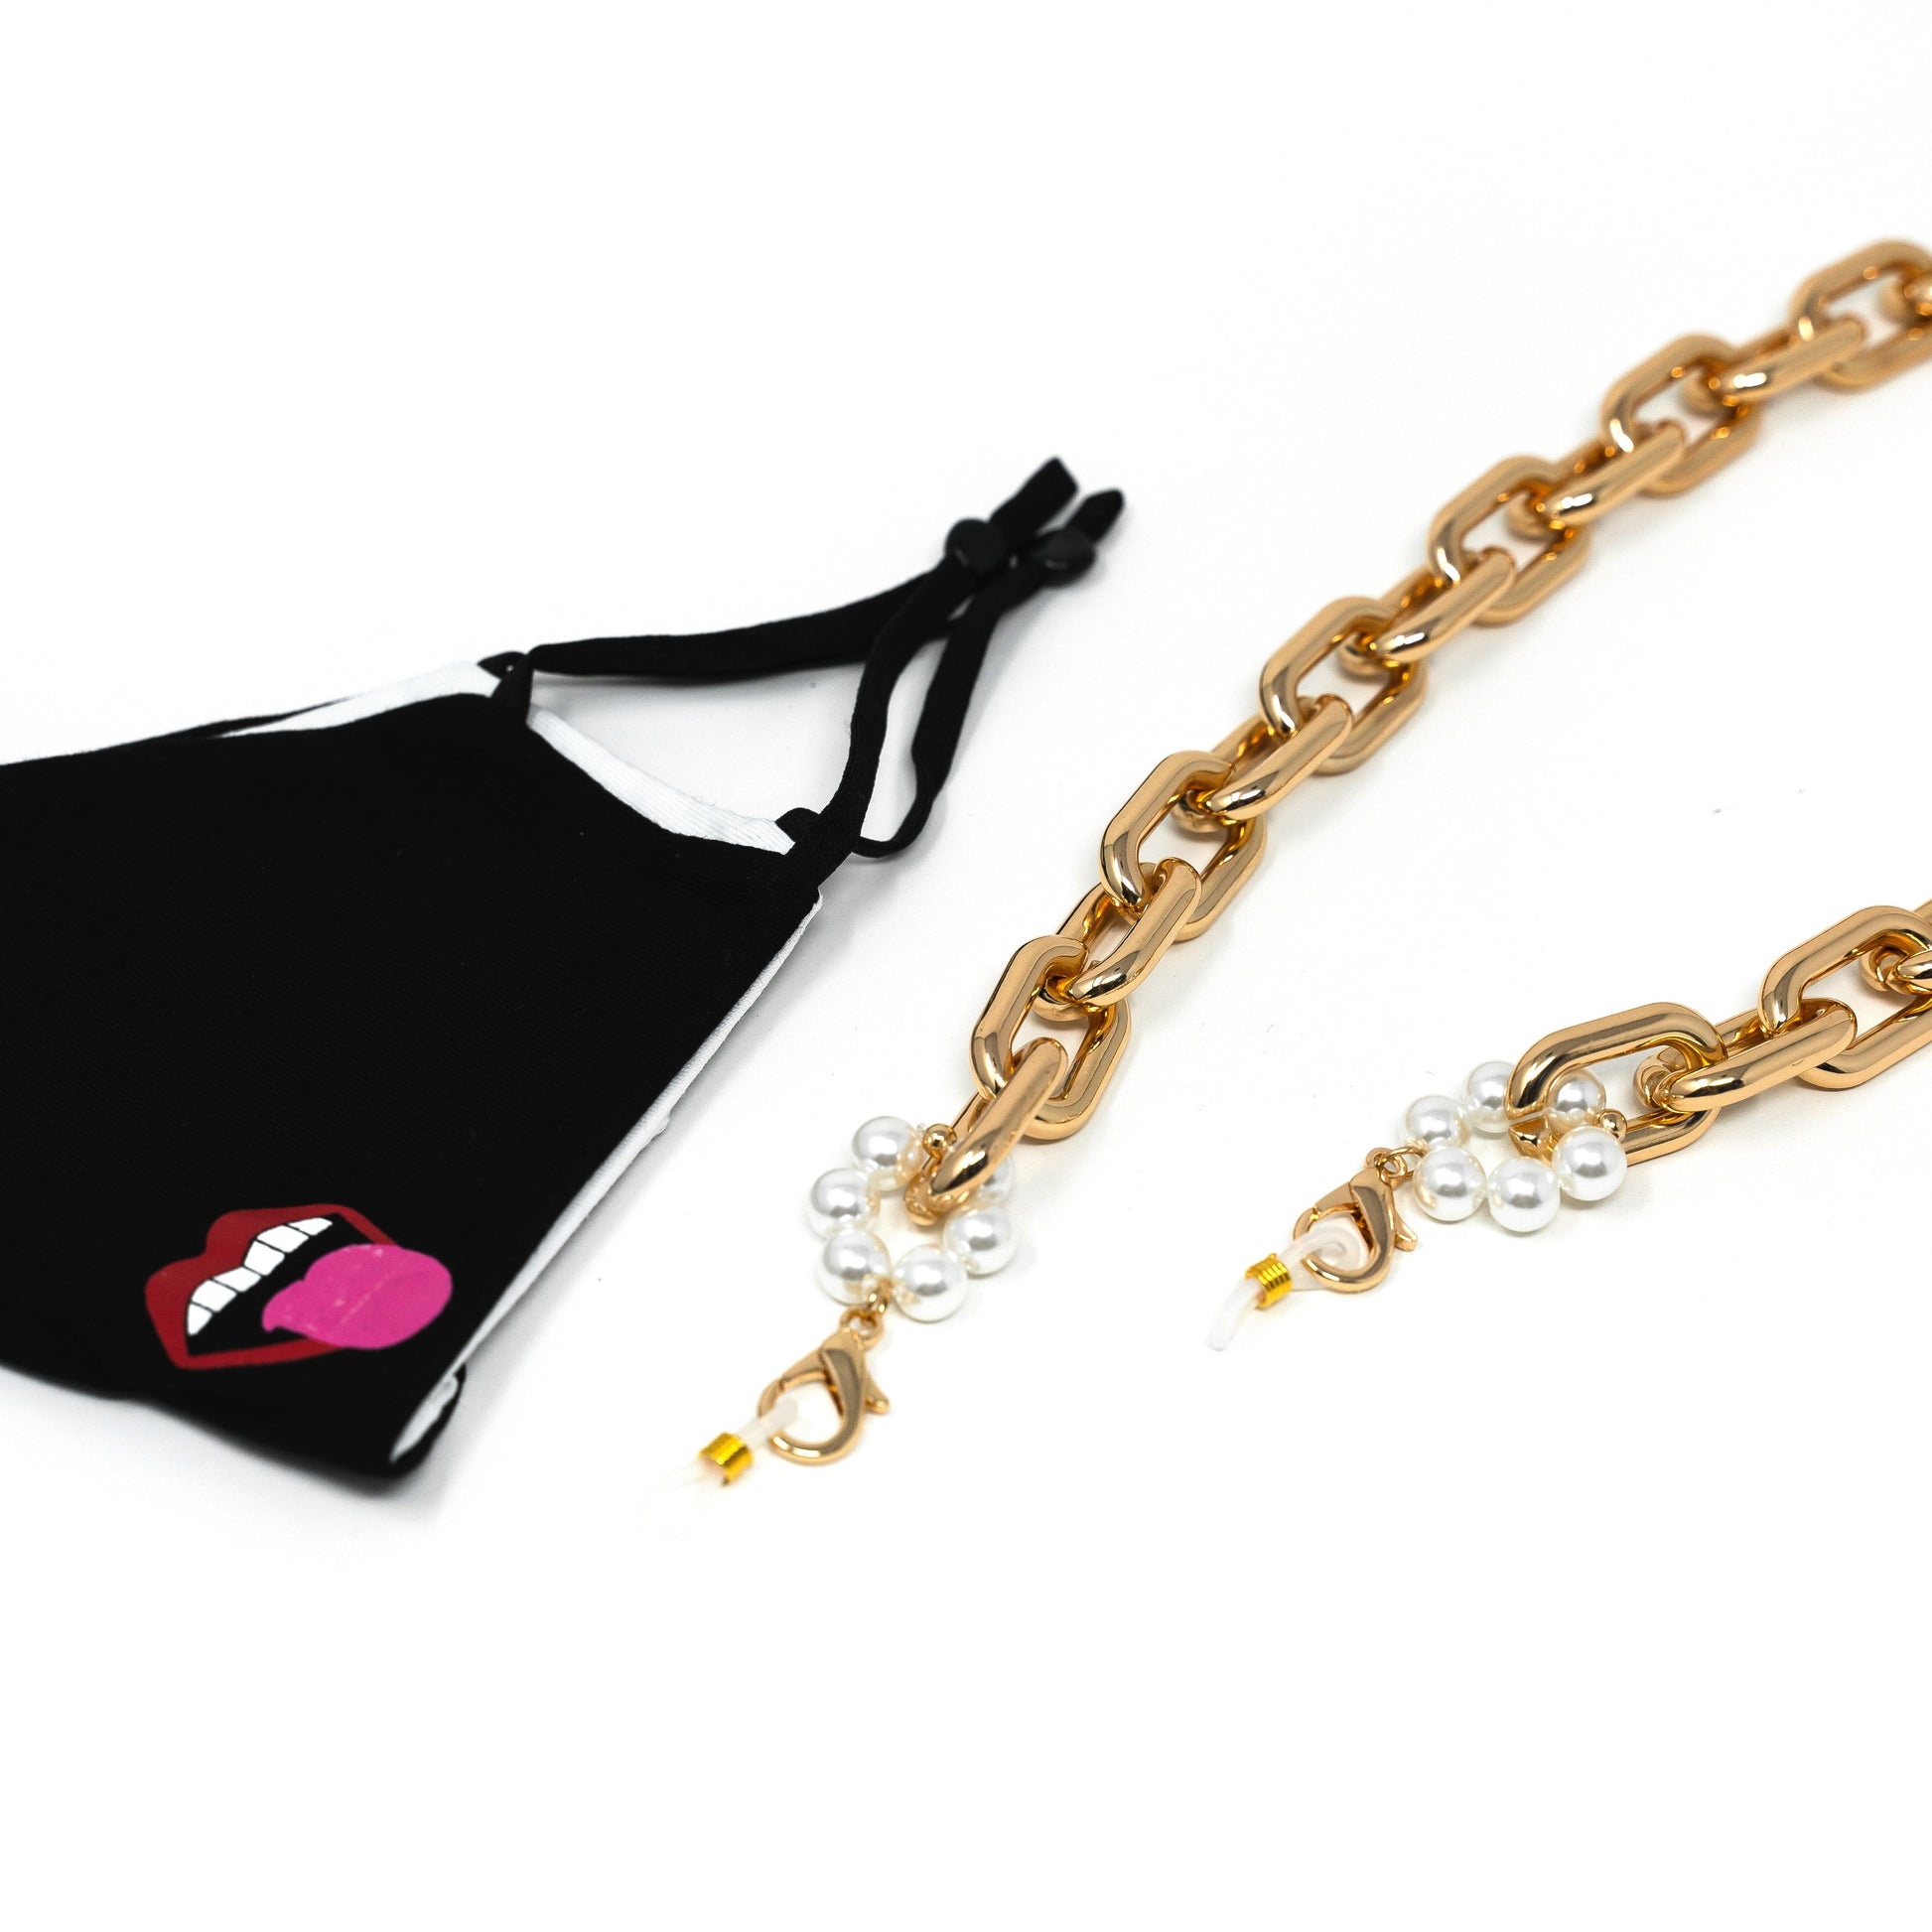 Save Your Mask - Sis Kiss Mask Chains ACCESSORY The Sis Kiss Bold Gold Link and Pearl Accent